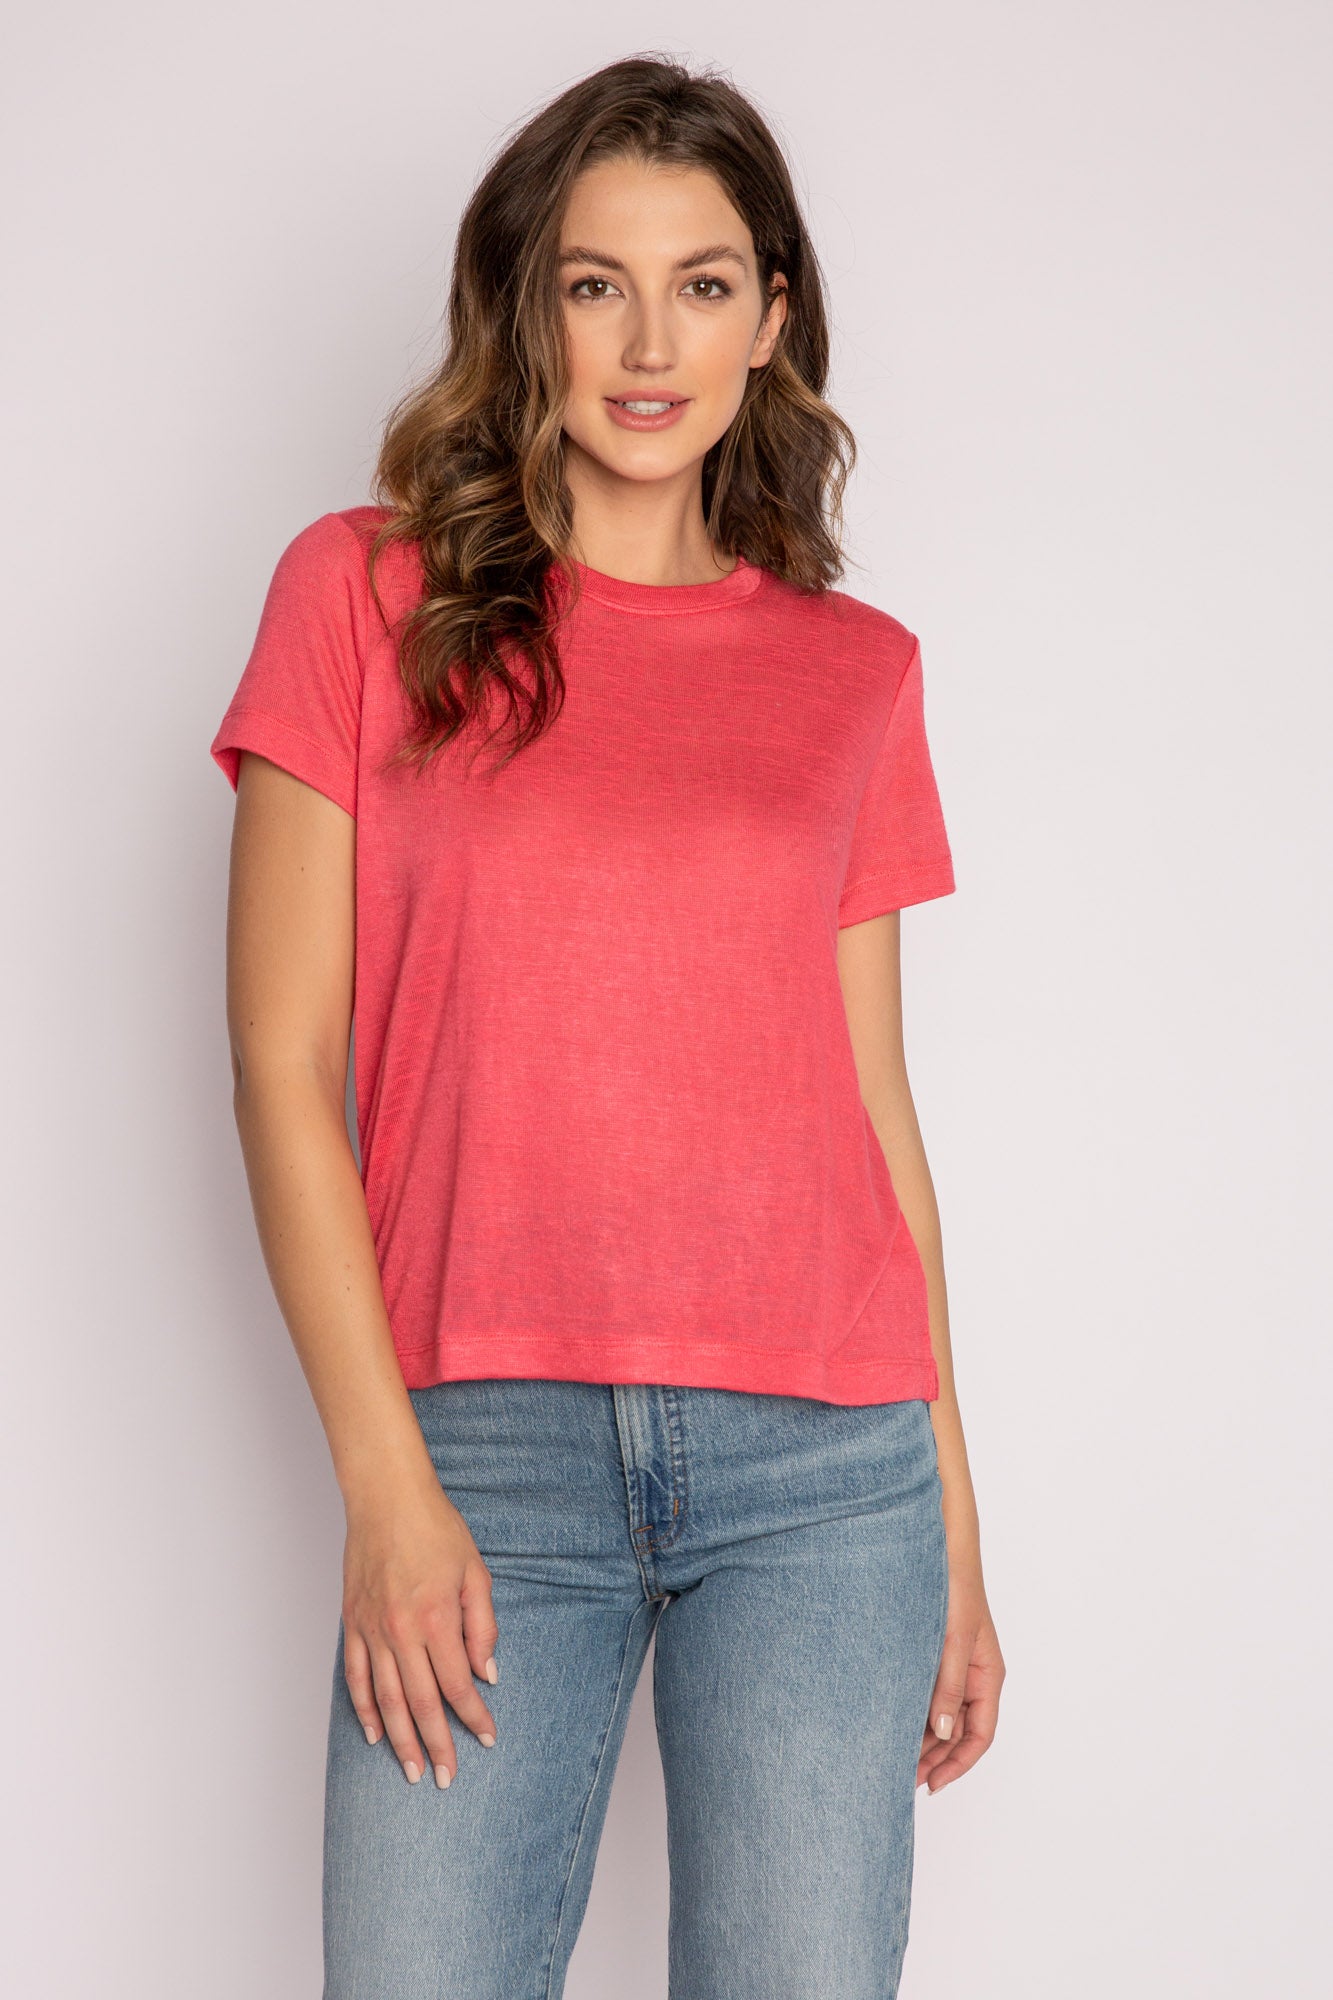 Back to Basics S/S Top-Hot Pink